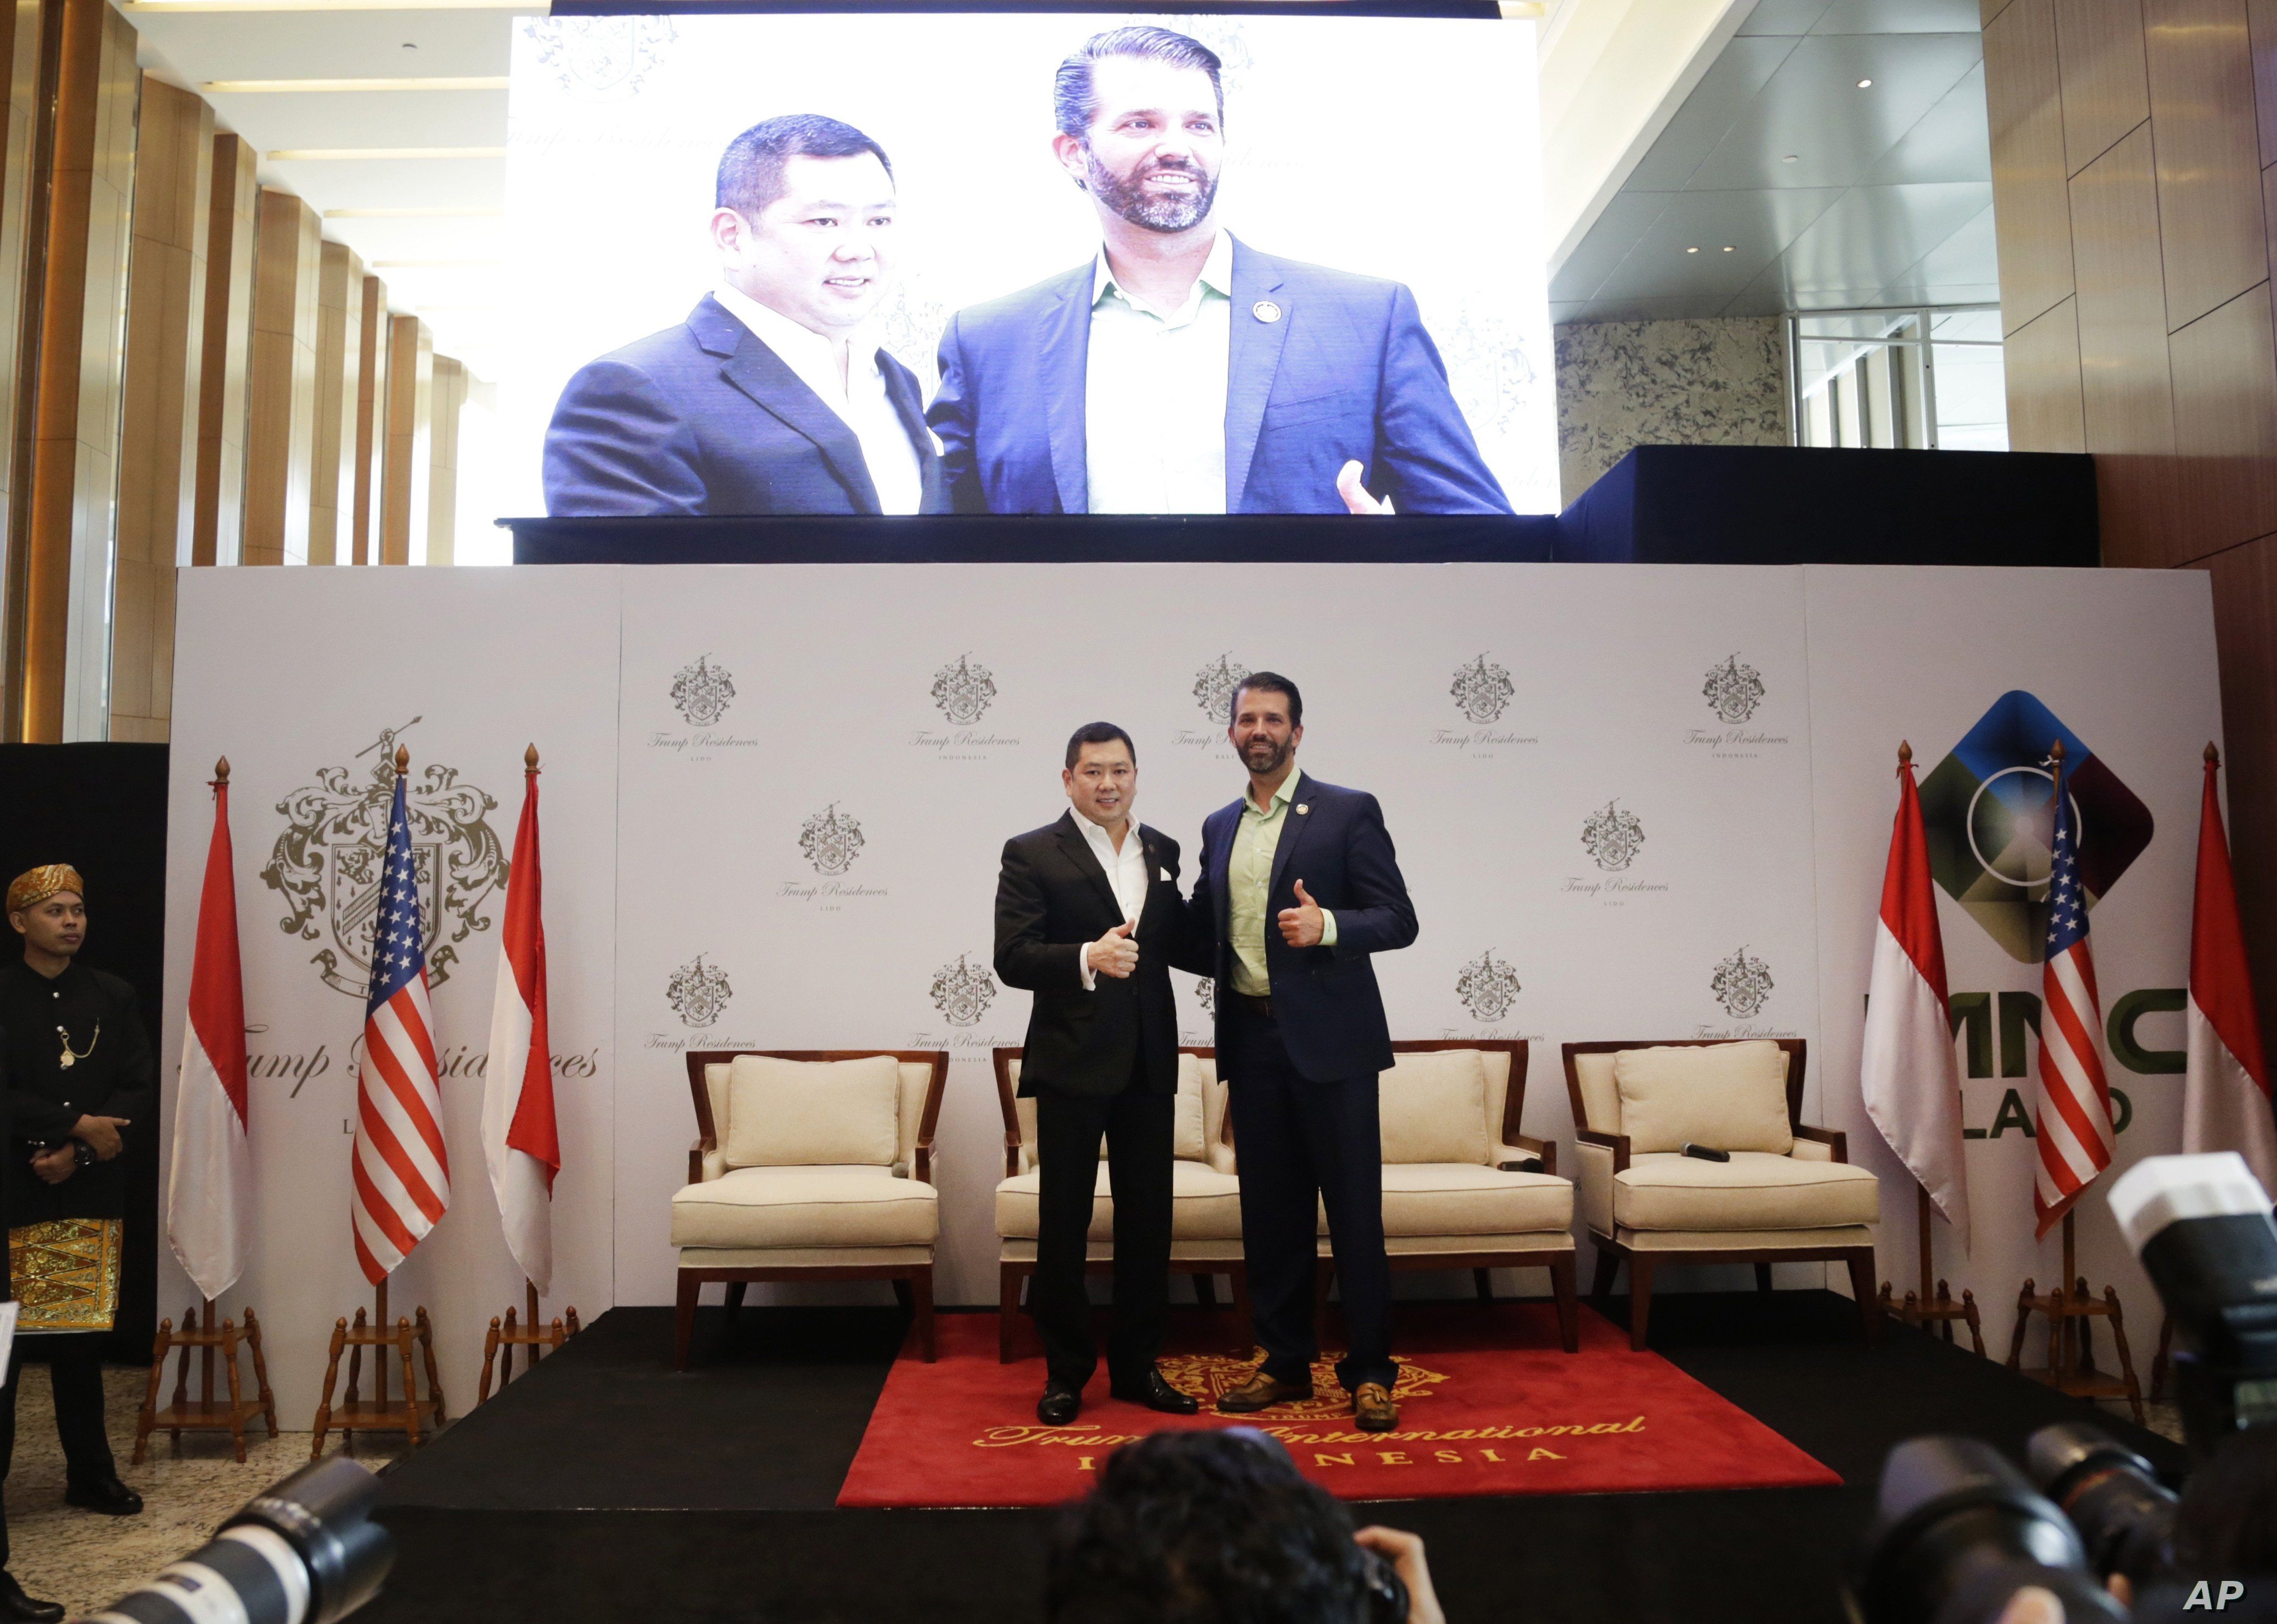 Donald Trump Jr., right, son of U.S. President Donald Trump, and Media Nusantara Citra (MNC) Group President and CEO Hary Tanoesoedibjo pose for photographers during a press conference in Jakarta, Indonesia, Aug. 13, 2019. 